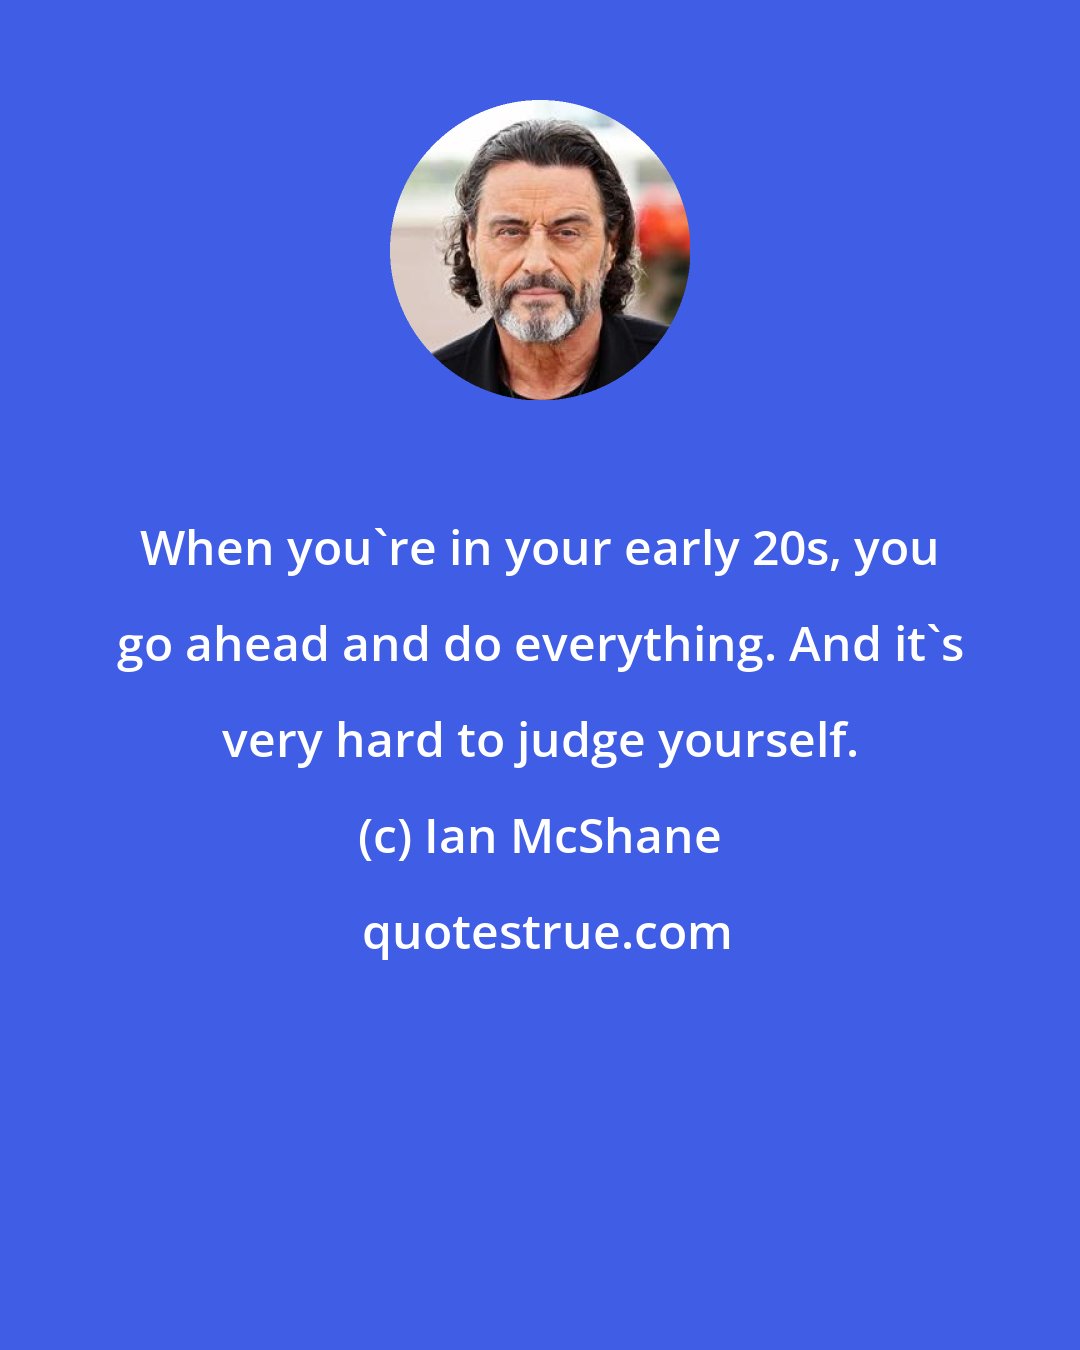 Ian McShane: When you're in your early 20s, you go ahead and do everything. And it's very hard to judge yourself.